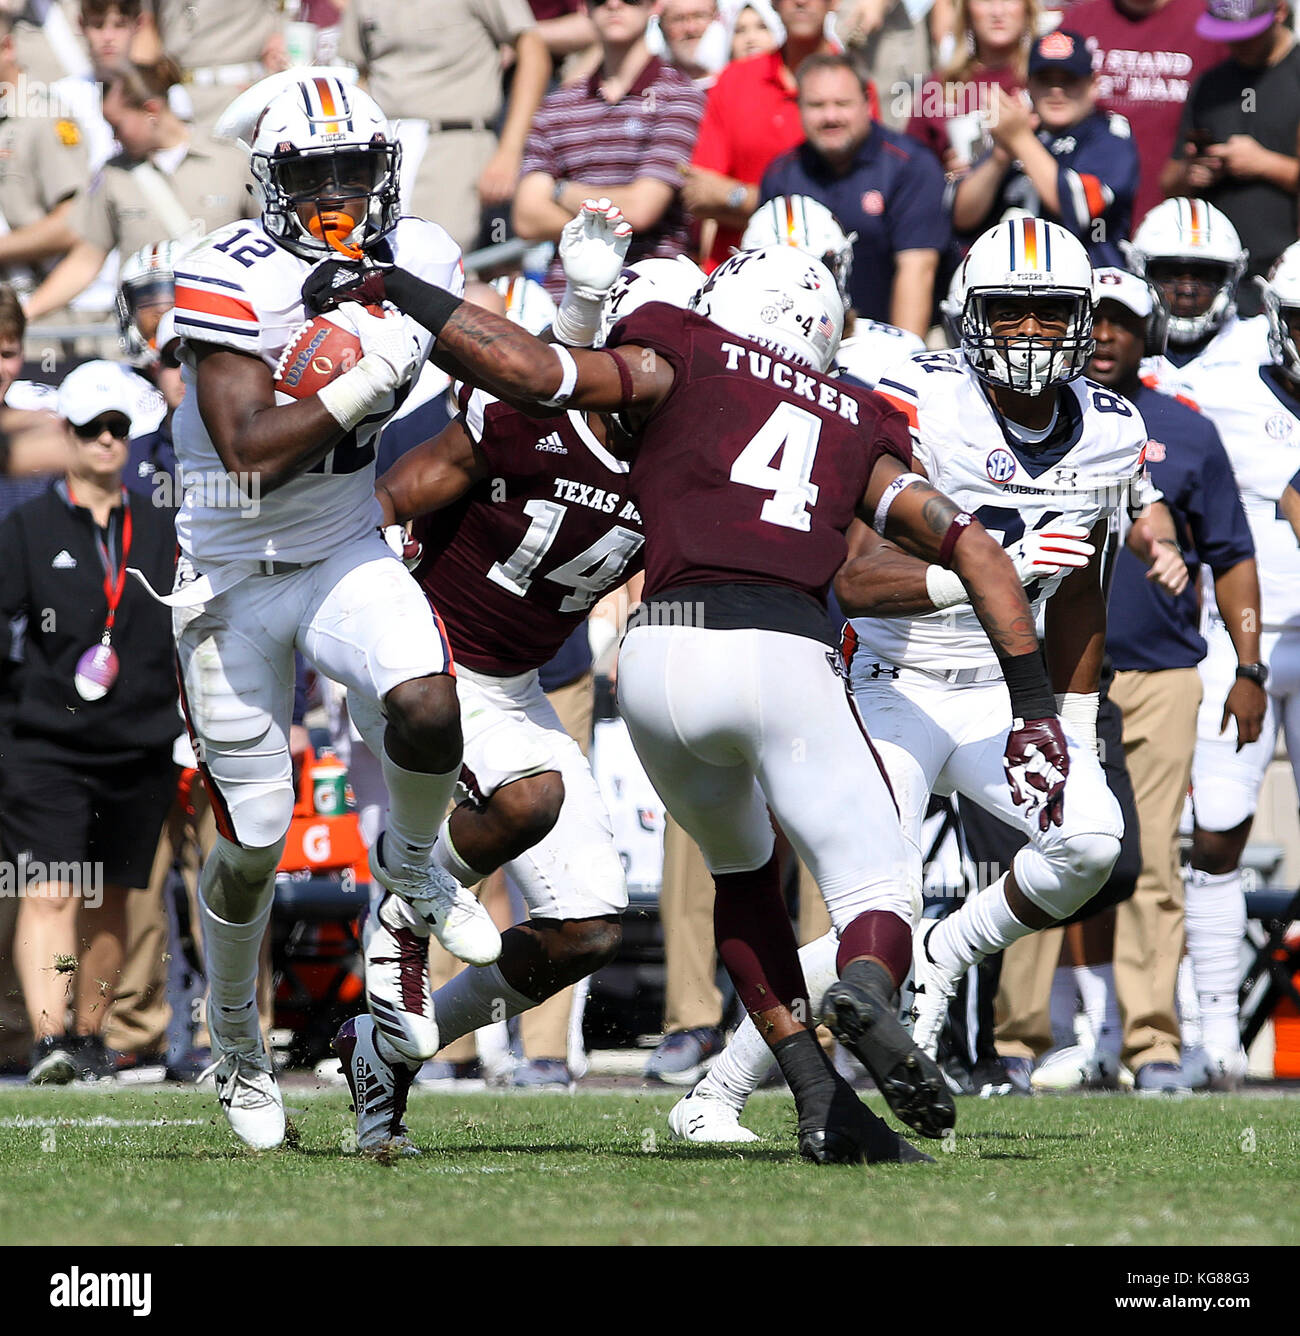 November 4, 2017: Auburn Tigers wide receiver Eli Stove (12) rushes past the tackle of Texas A&M Aggies defensive back Derrick Tucker (4) in the third quarter during the NCAA football game between the Auburn Tigers and the Texas A&M Aggies at Kyle Field in College Station, TX; John Glaser/CSM. Stock Photo